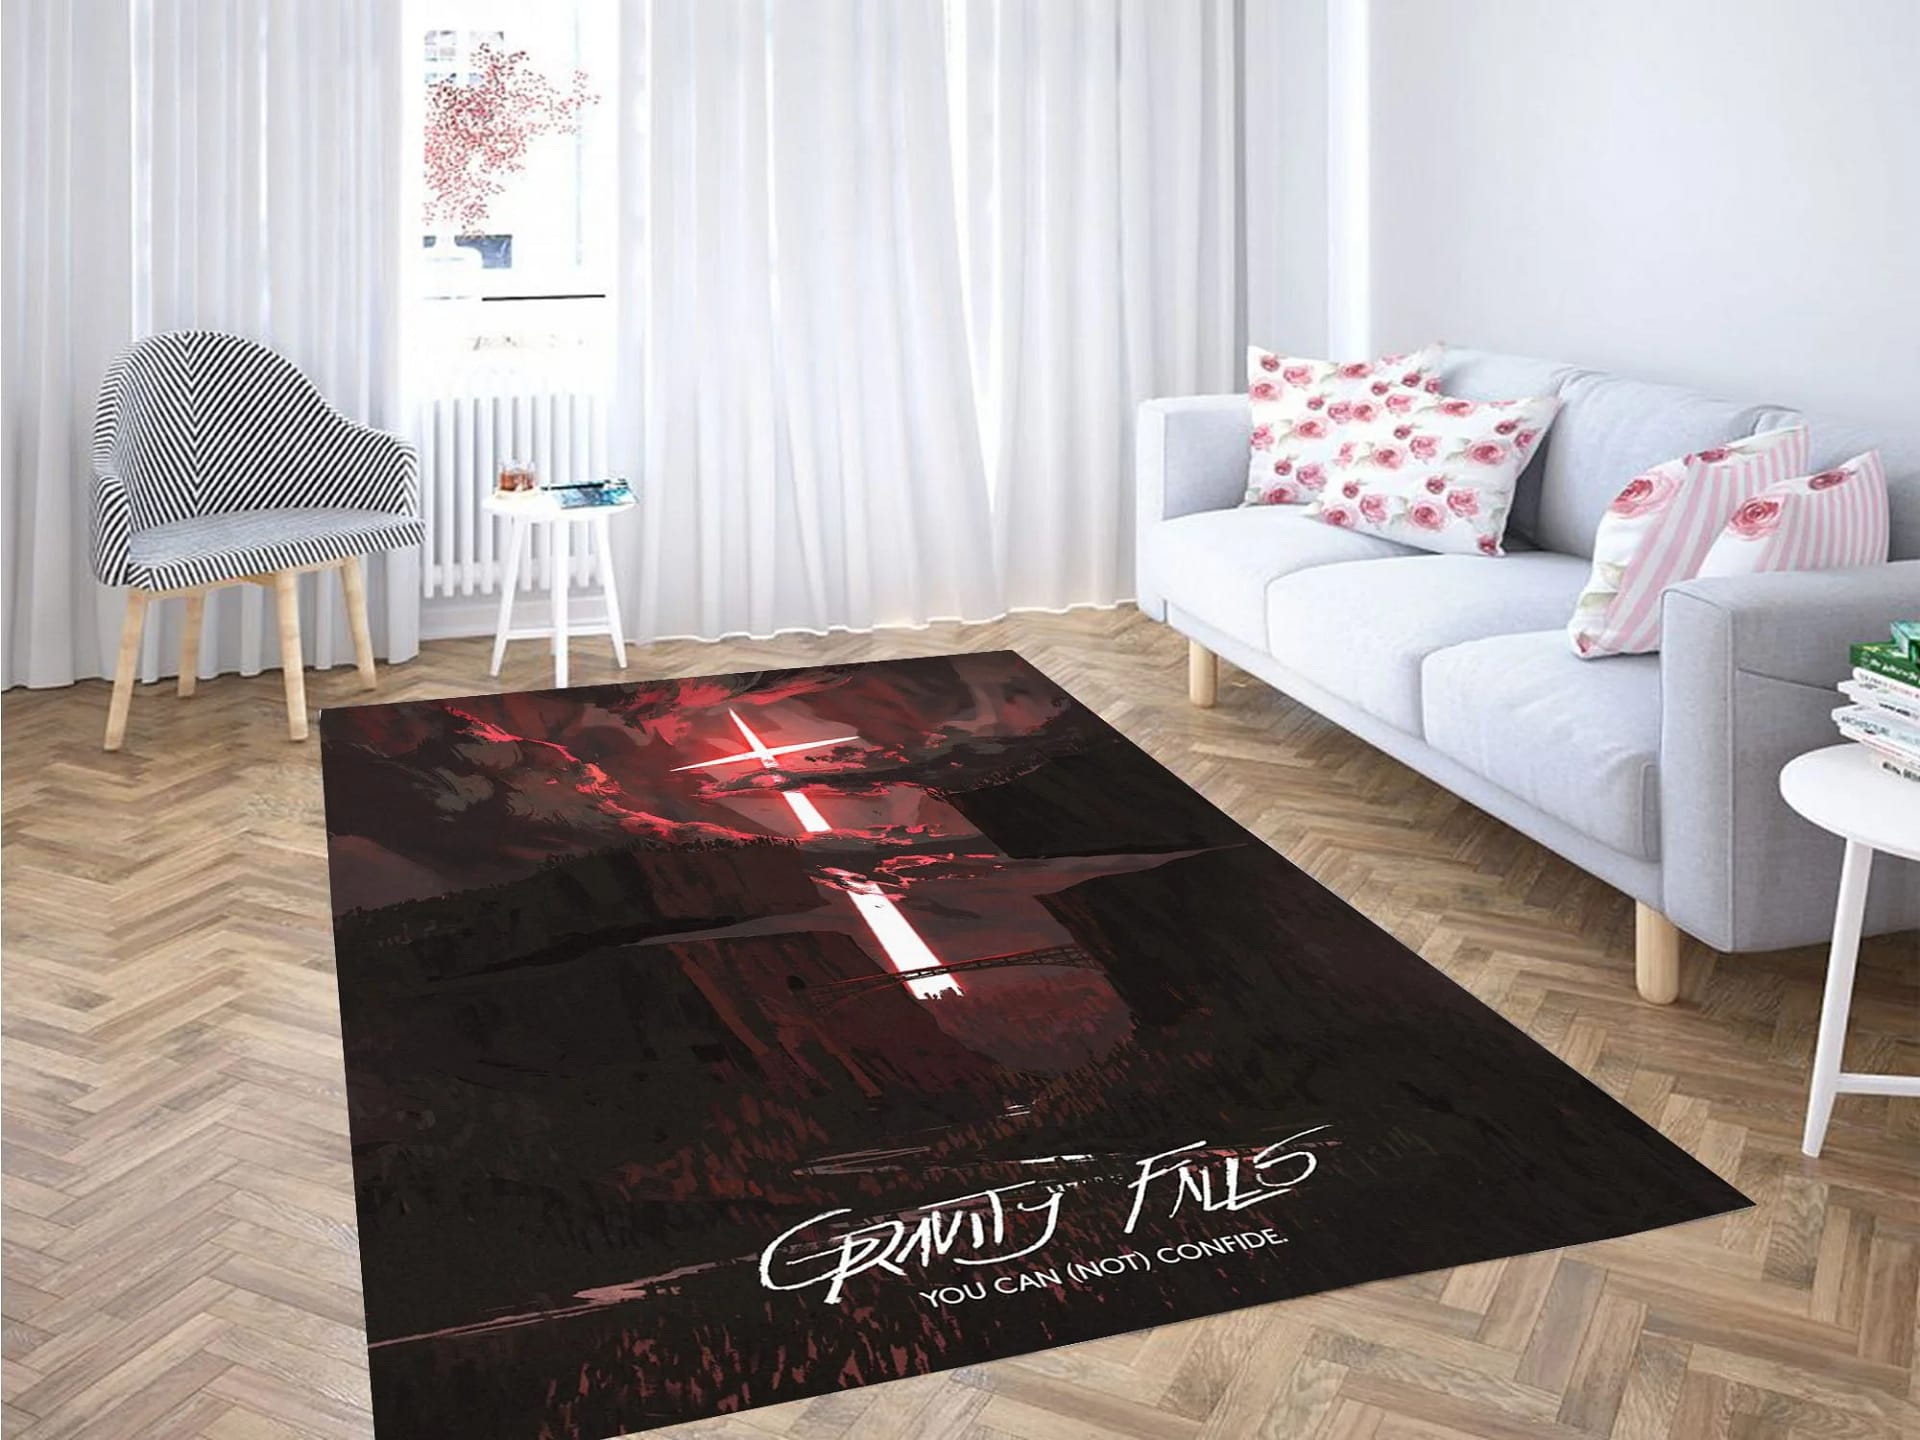 You Can Not Confide Gravity Falls Carpet Rug